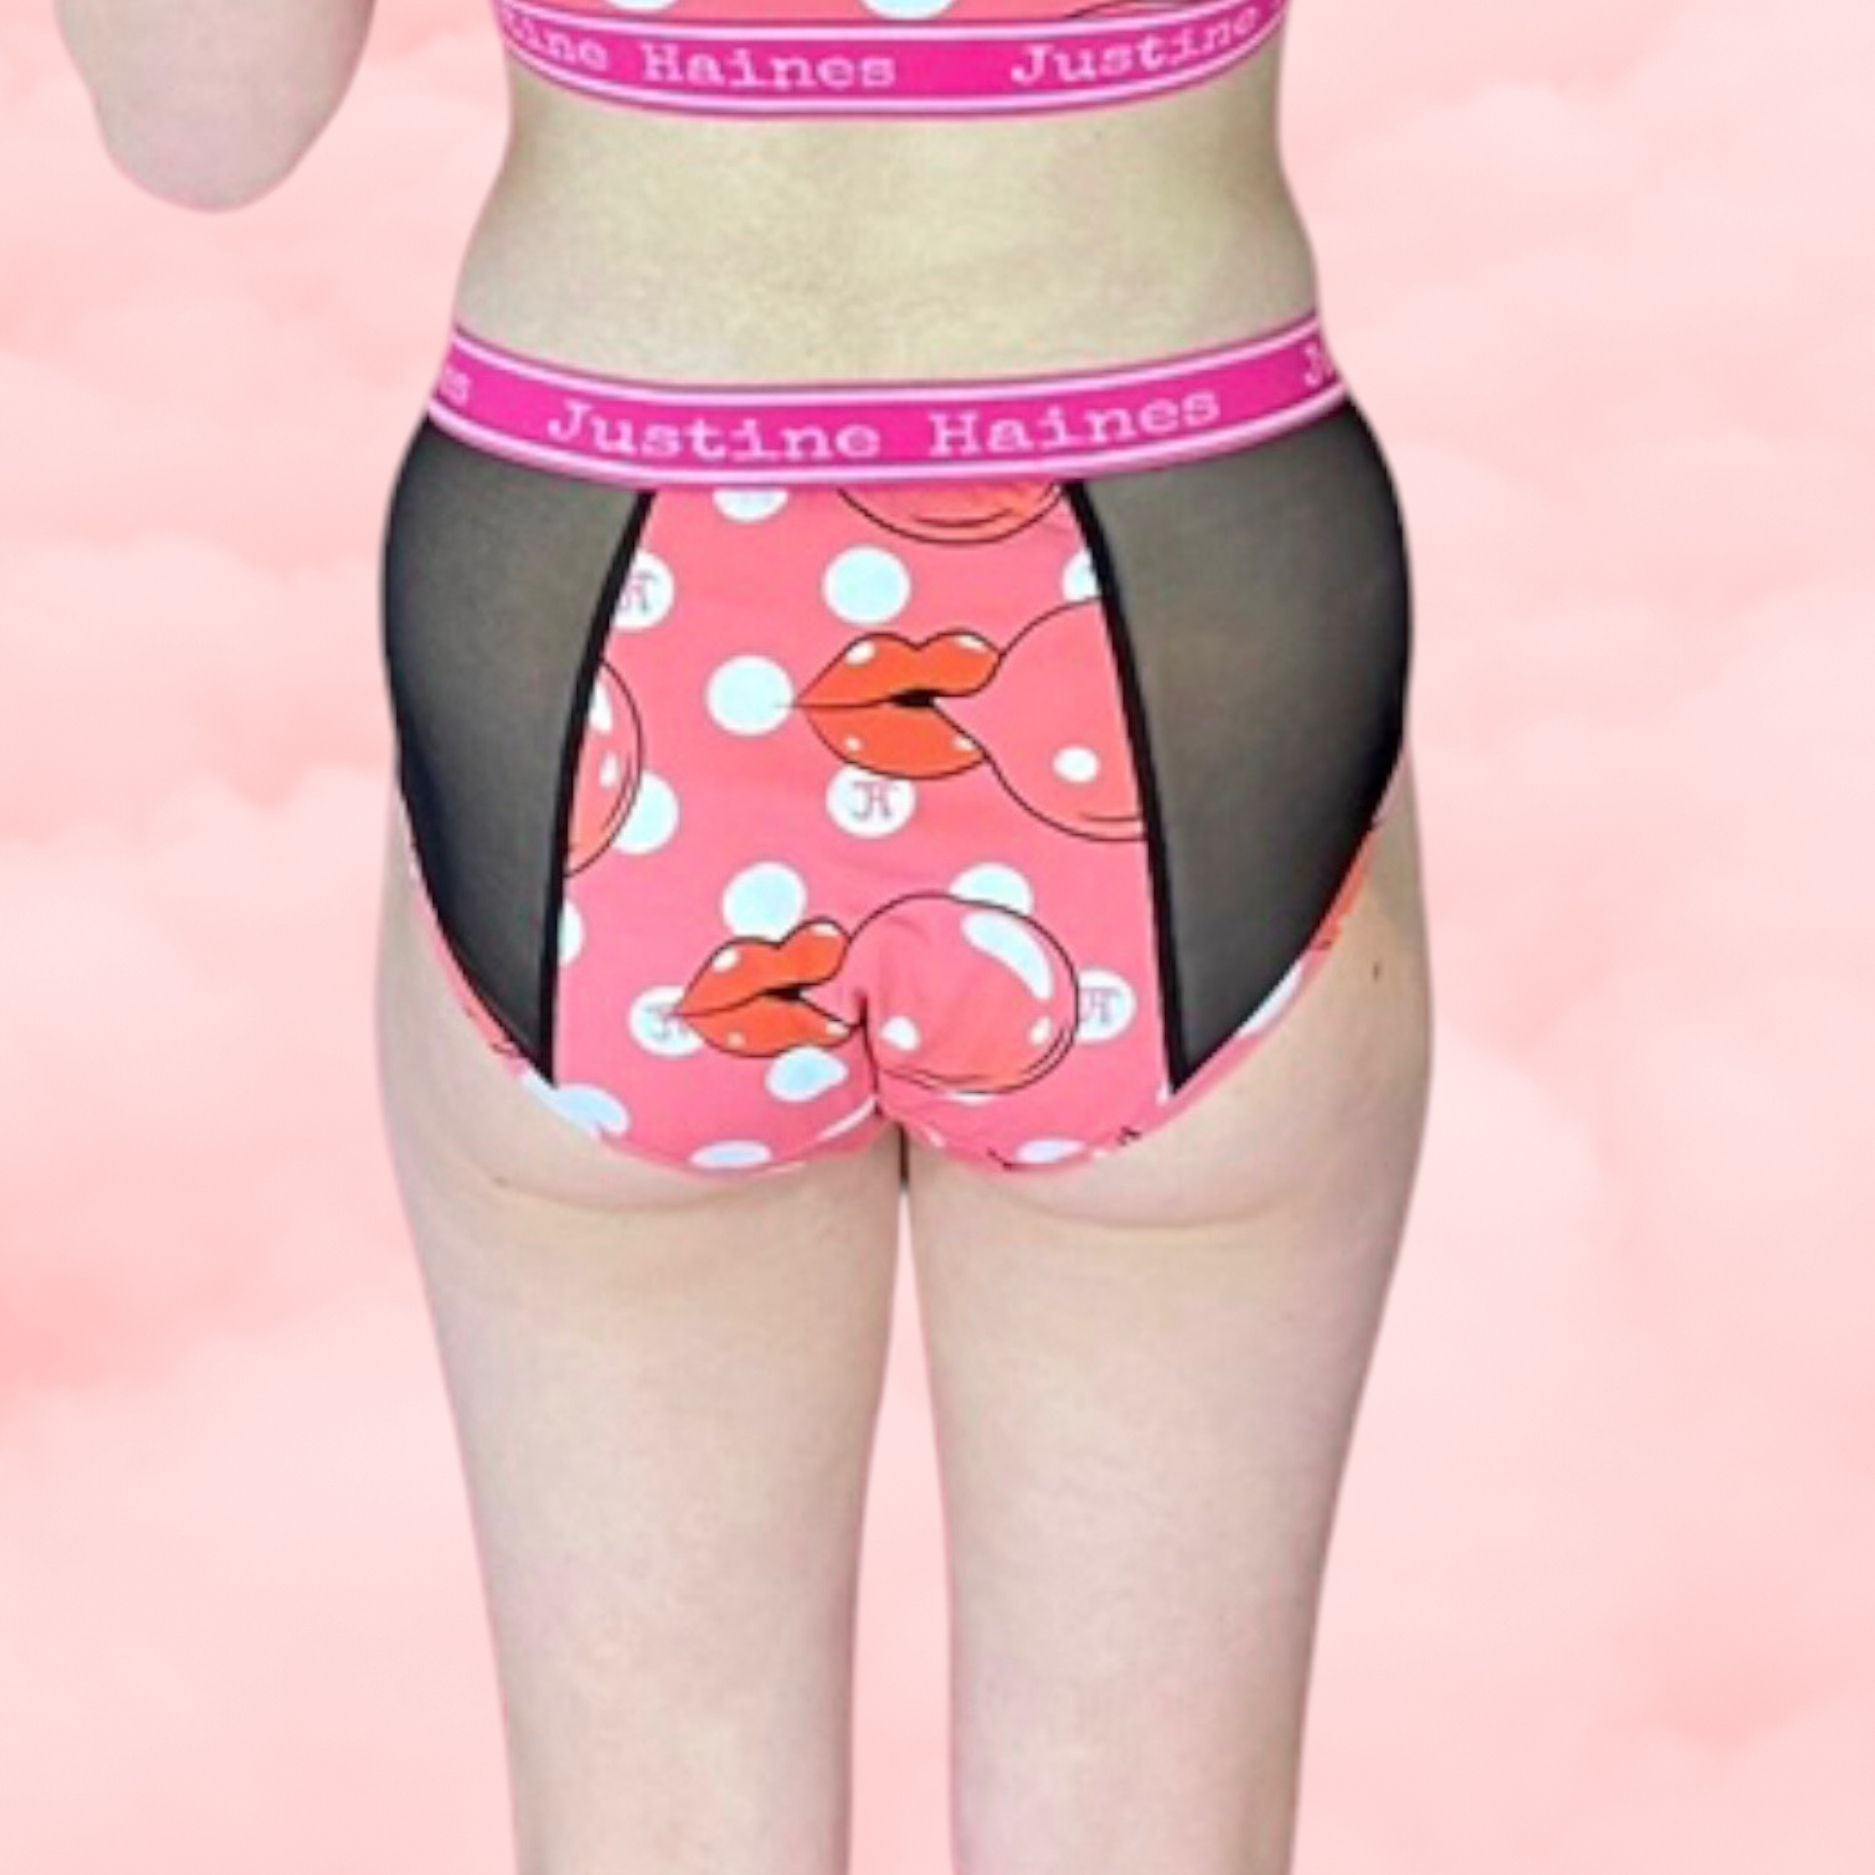 Wear Thongs on your Period! Hot Pink Pop Art – Justine Haines